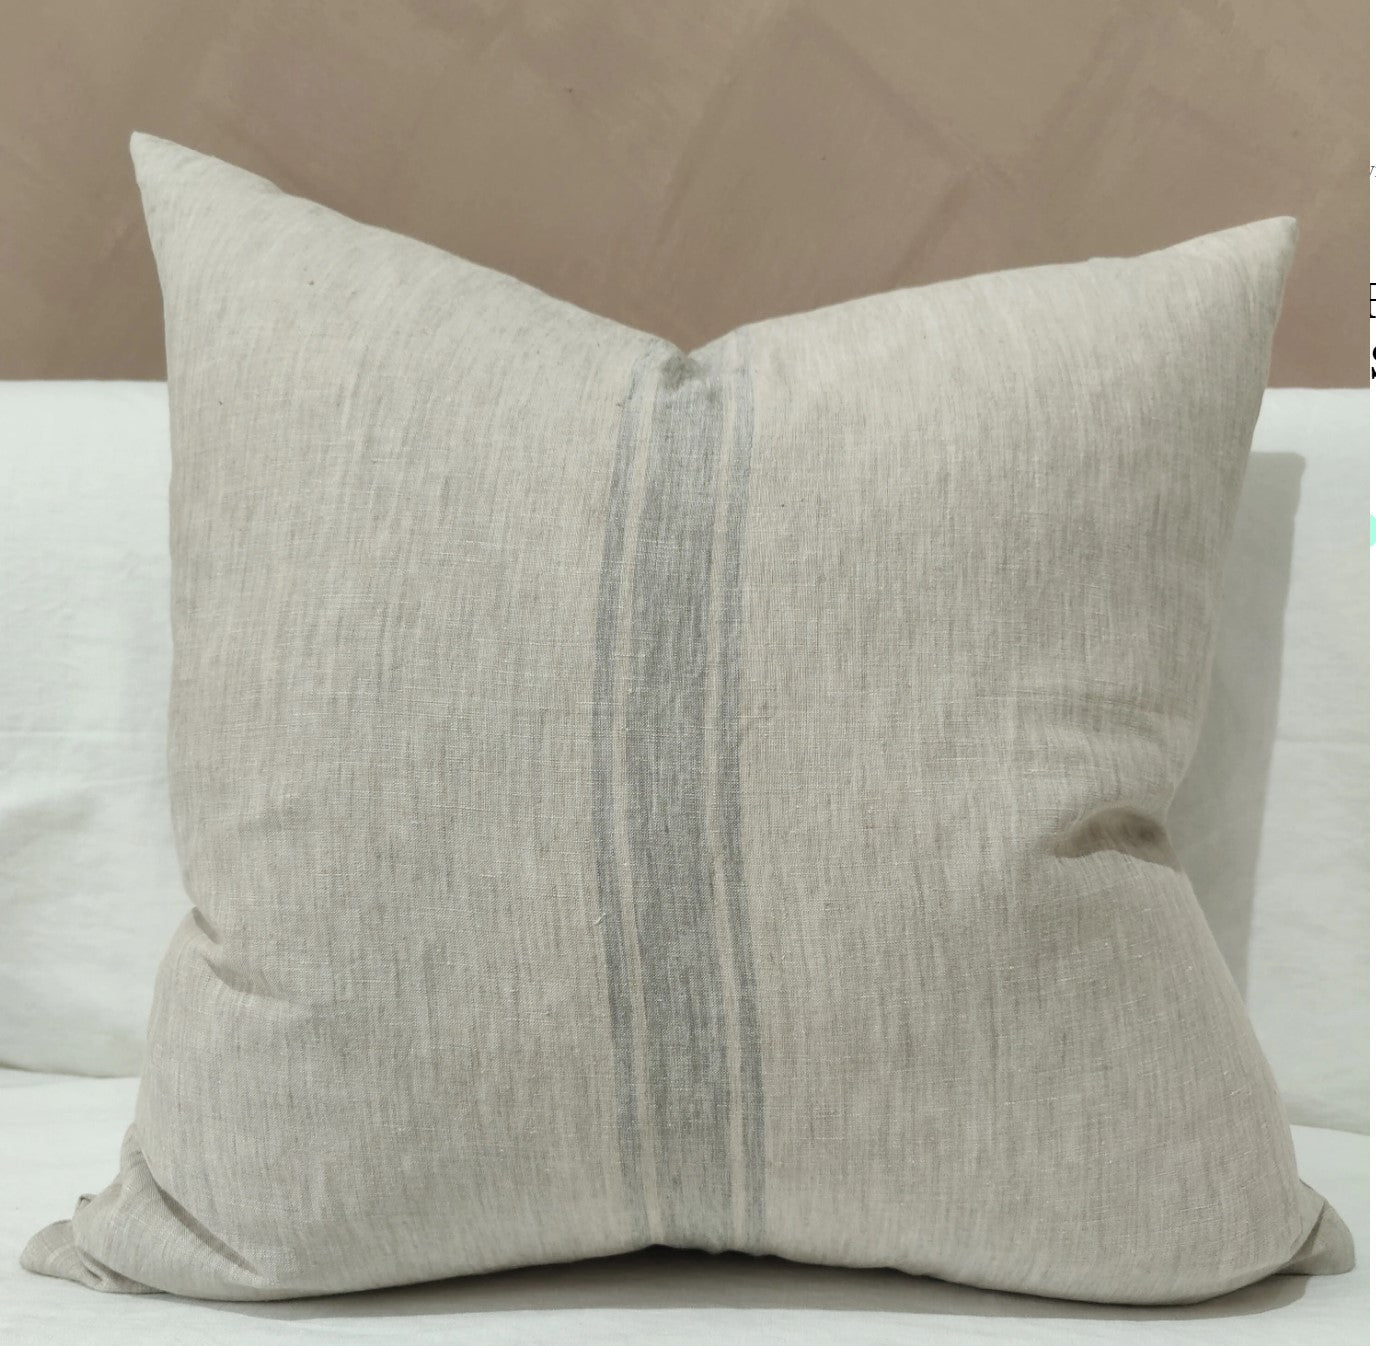 Made from pure French Linen & featuring plush feather filled insert, the Lyon Linen Faded Blue Cushion features subtle tones & is perfect paired with other cushions to add dimension in a living room or styled on a bed.